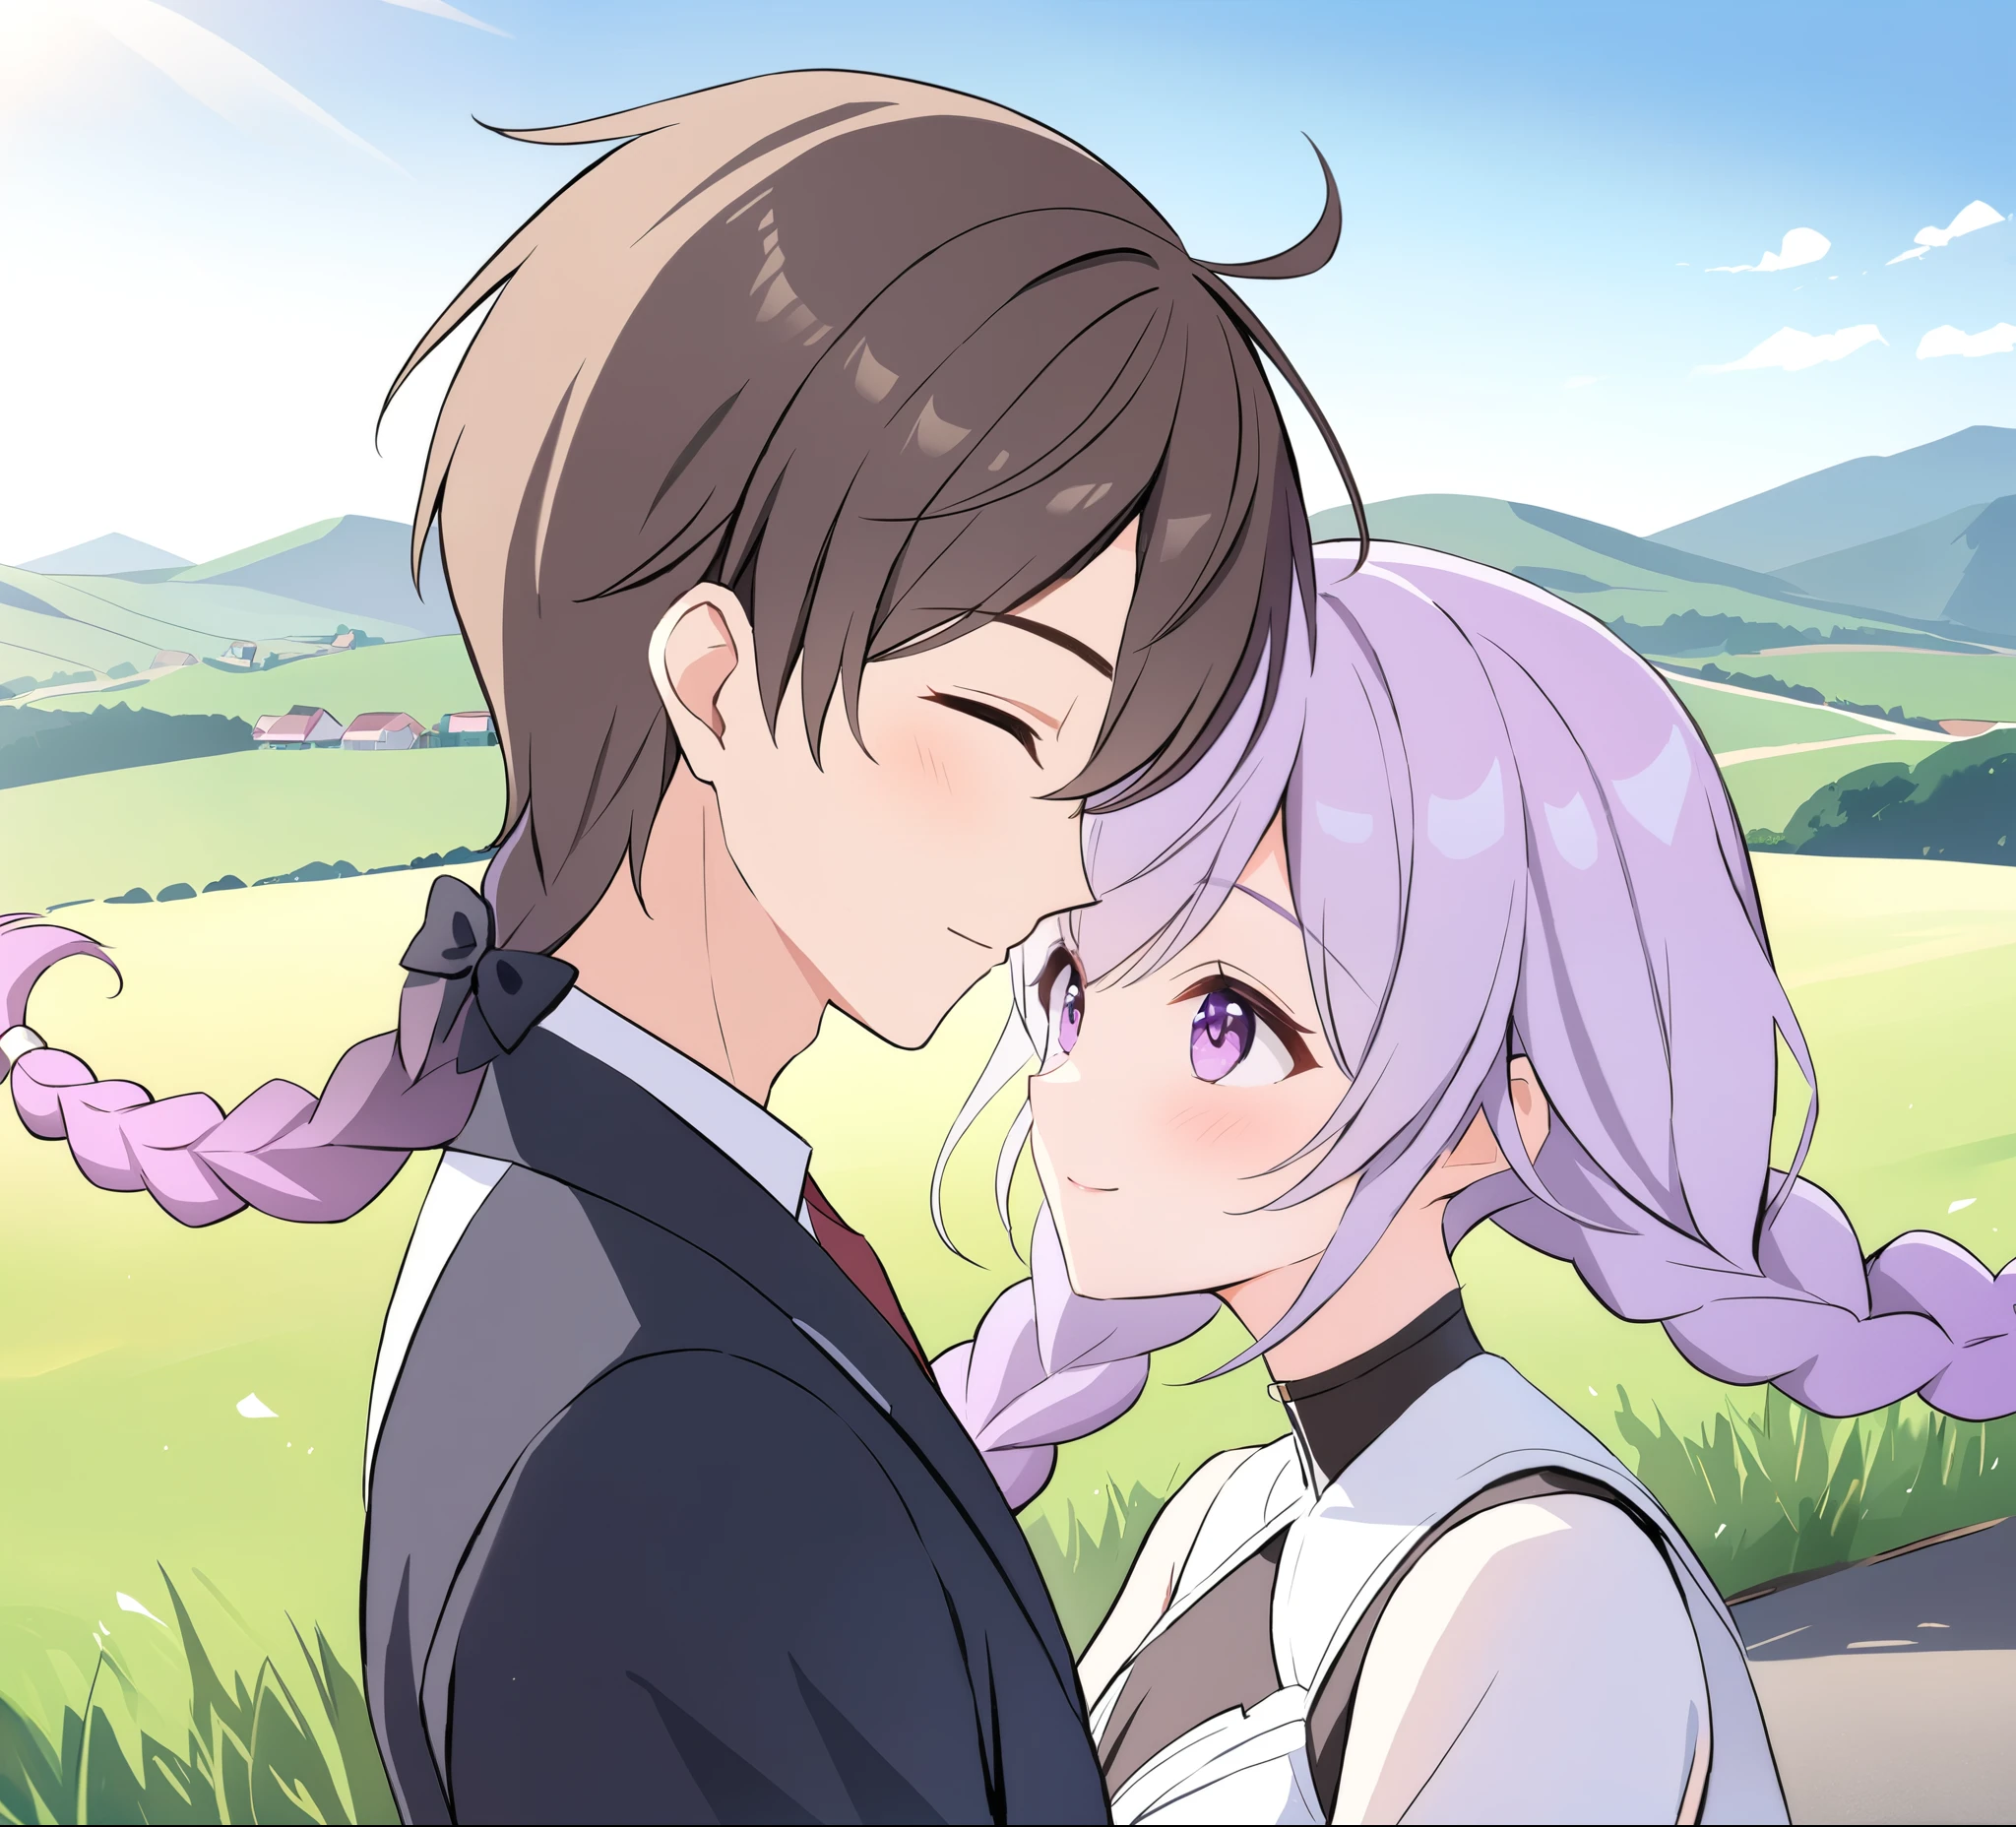 A couple(1 male, 1 woman with purple and white gradient double braids),Meet on a country road,Face to Face,Four eyes facing each other,Sunshine,The background is green fields and hills in the distance,Warmth,romantic,happiness